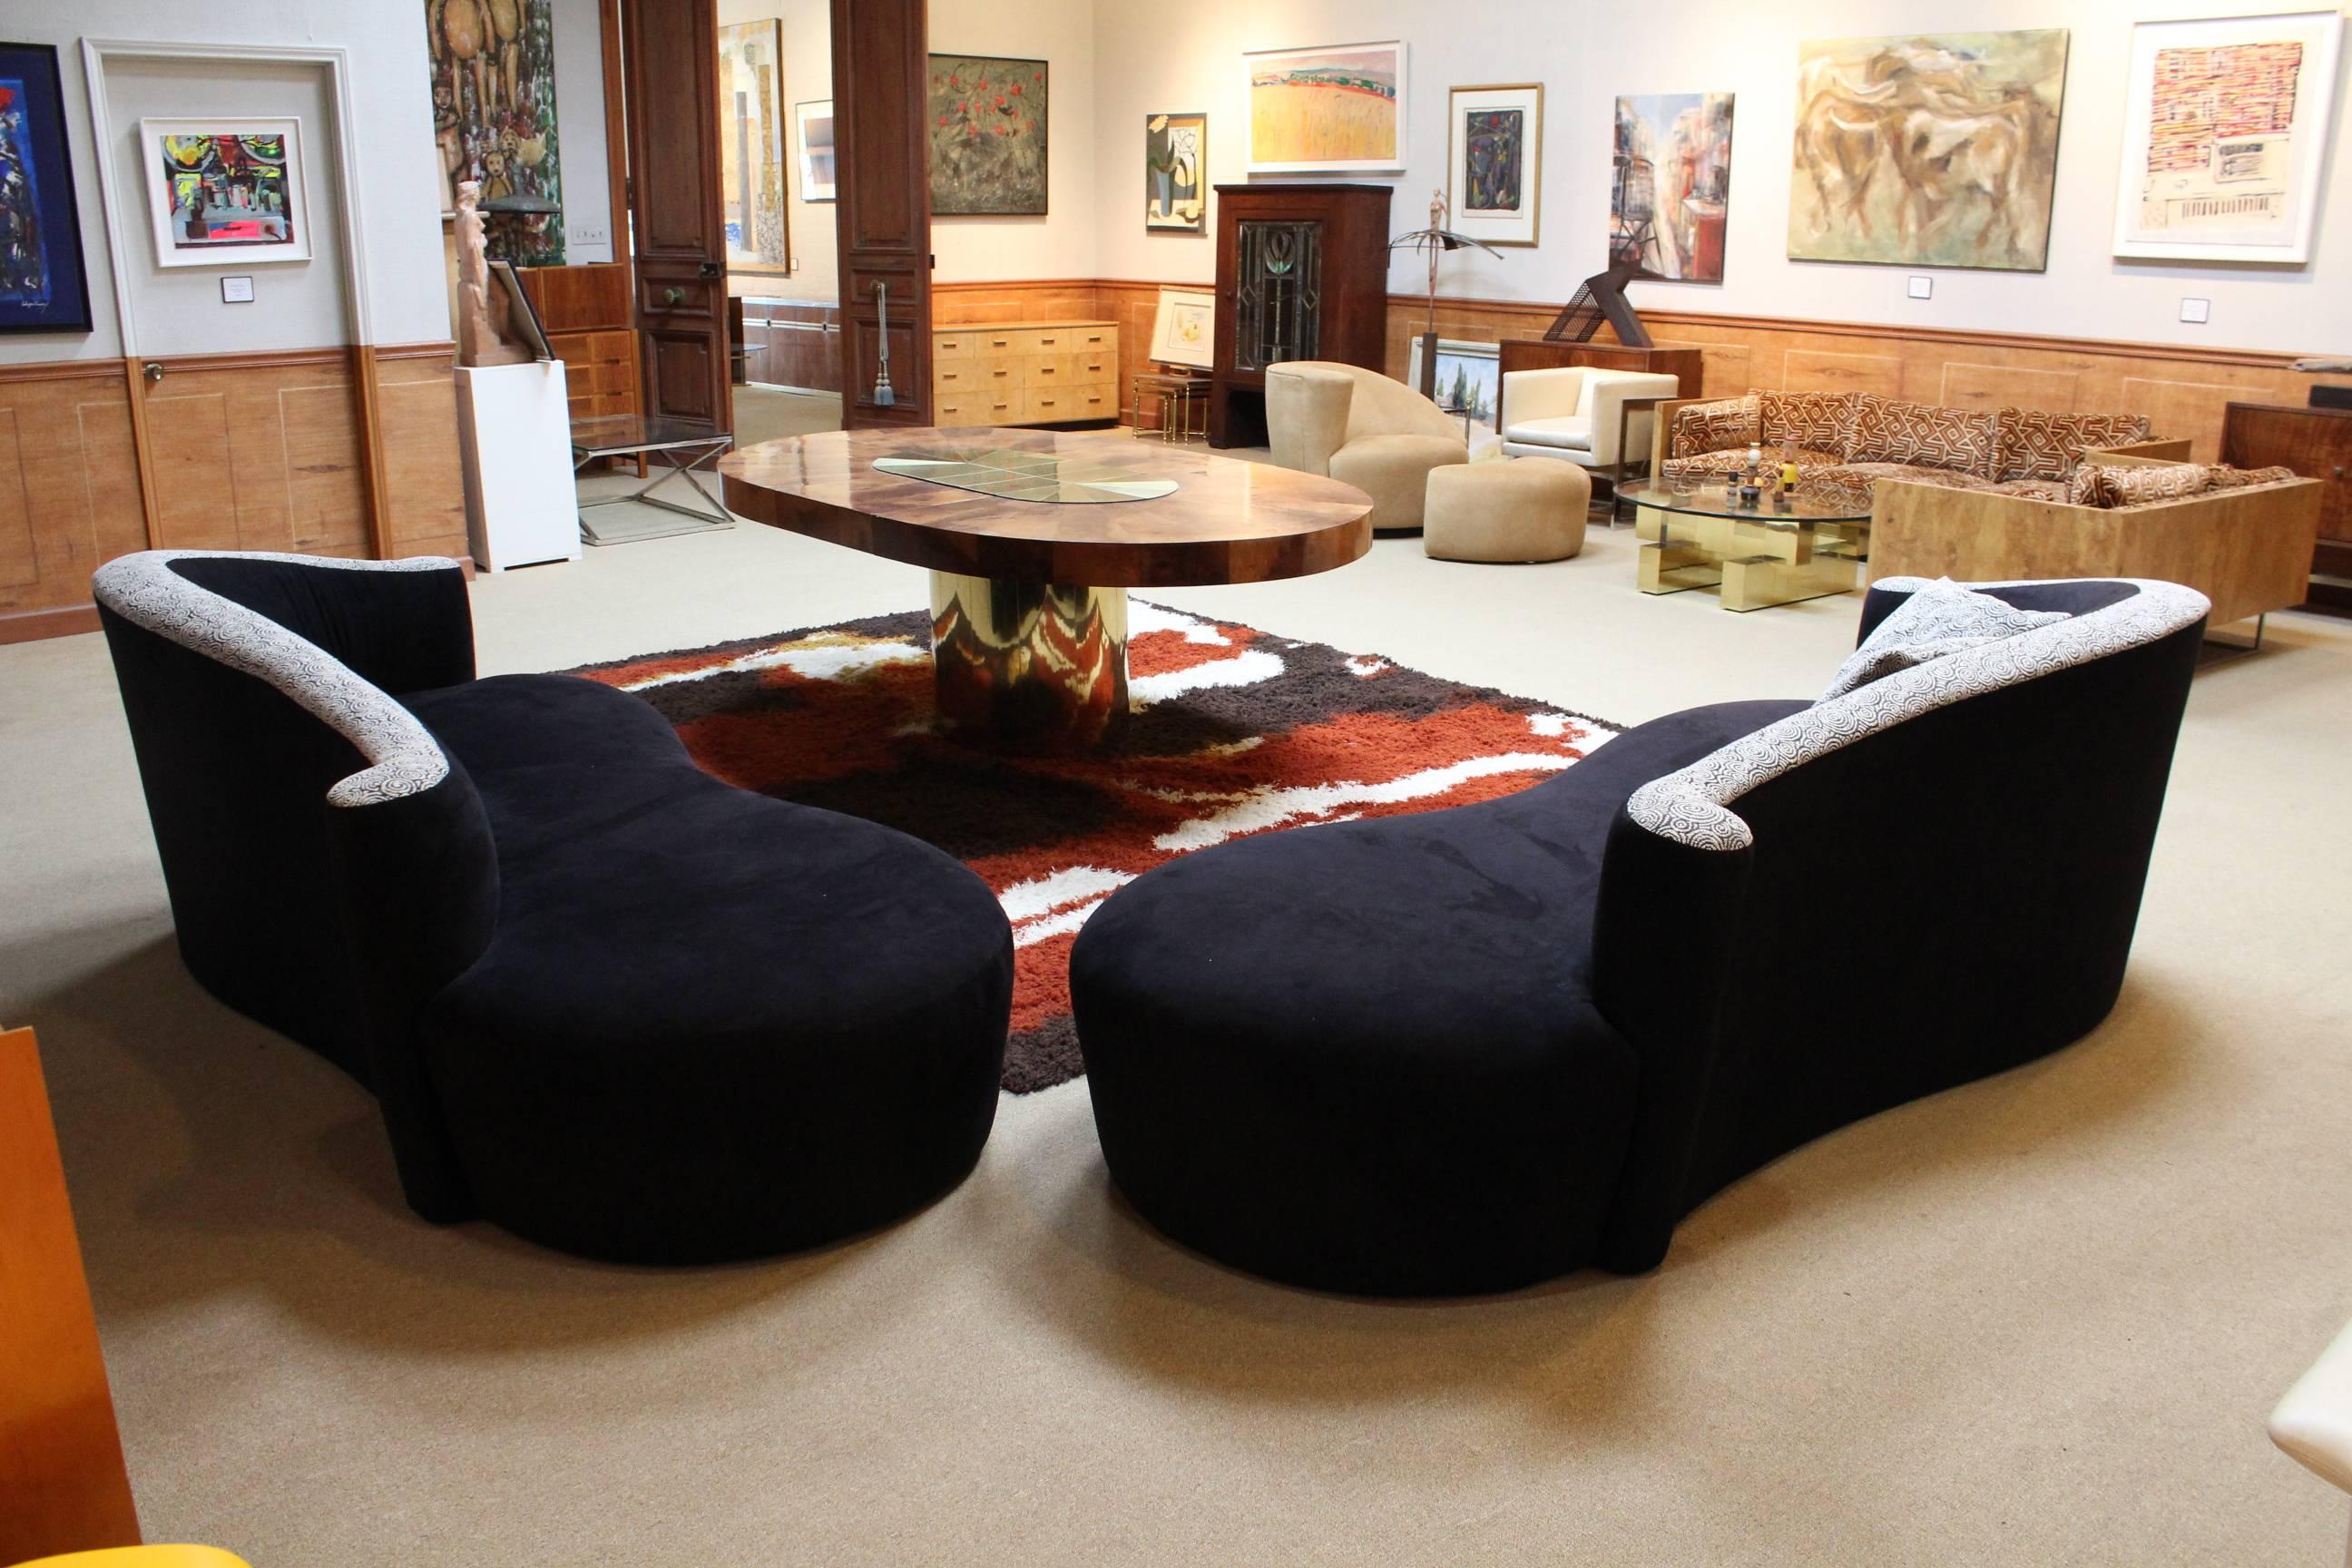 Pair of Serpentine Sofas with Lucite Leg, style of Vladimir Kagan for Weiman 4